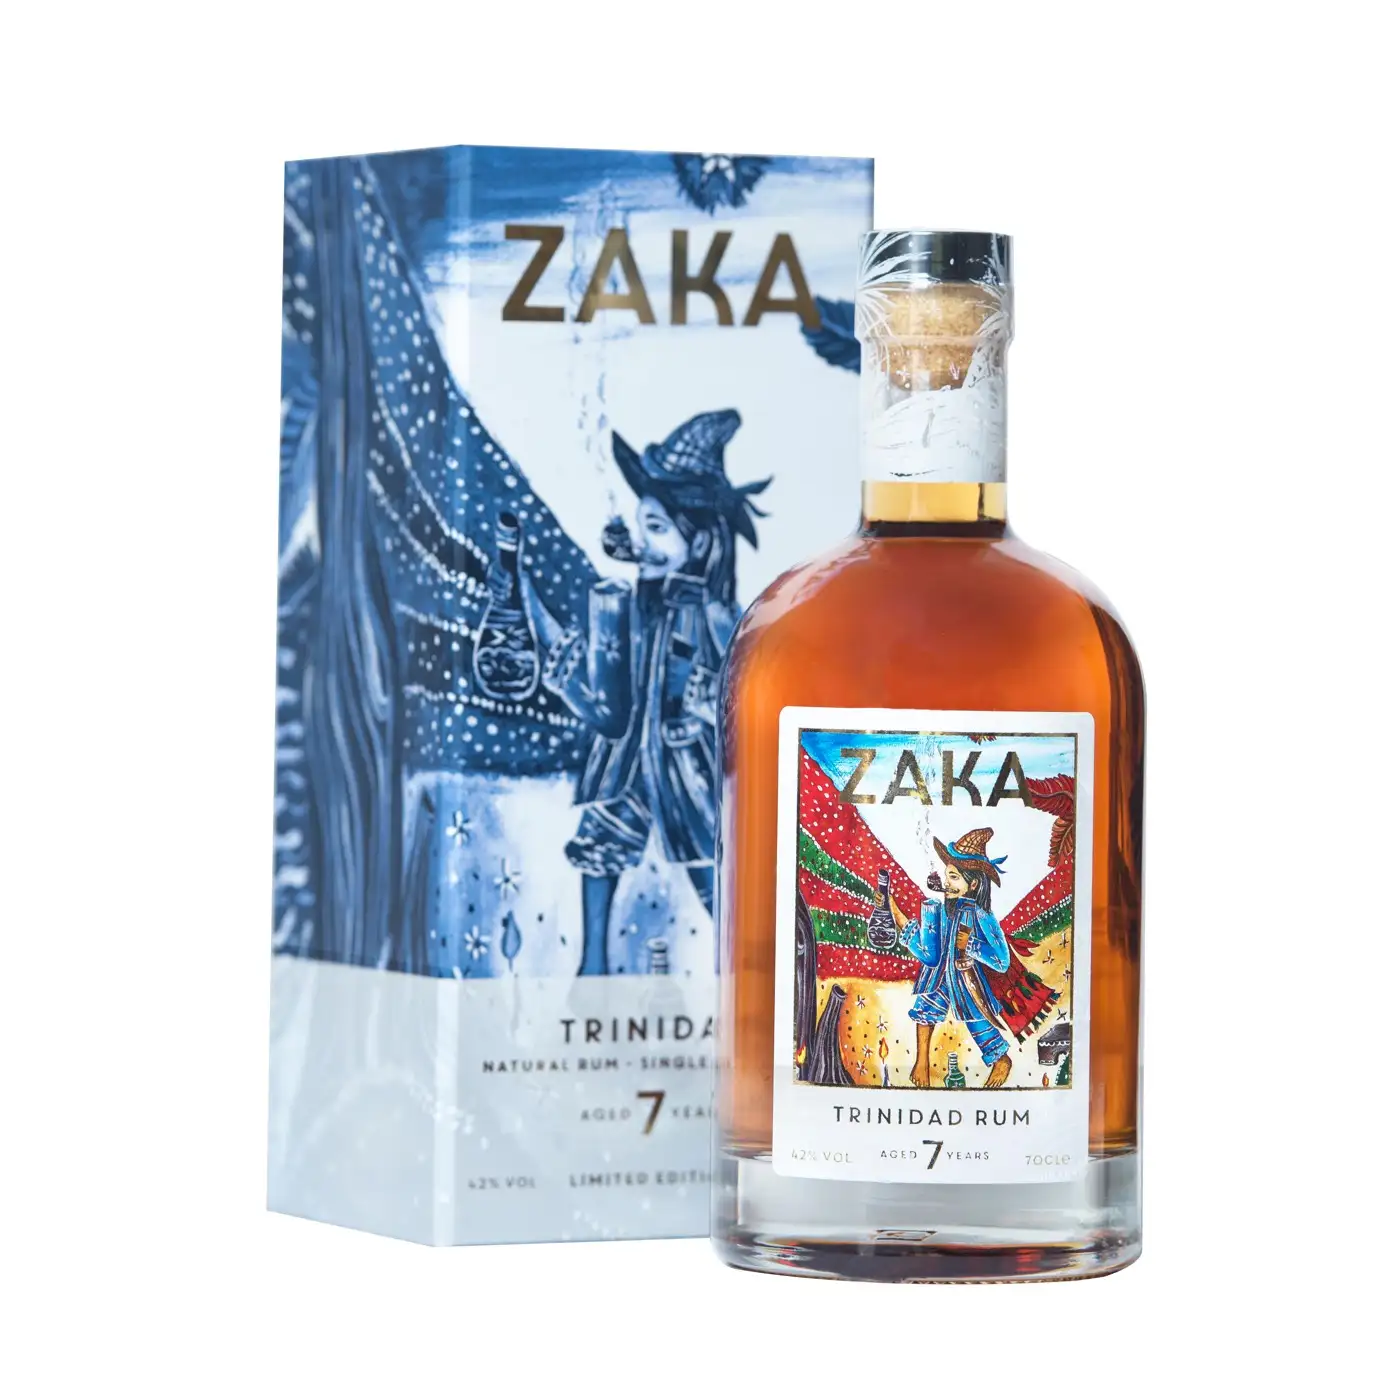 Image of the front of the bottle of the rum Zaka Trinidad